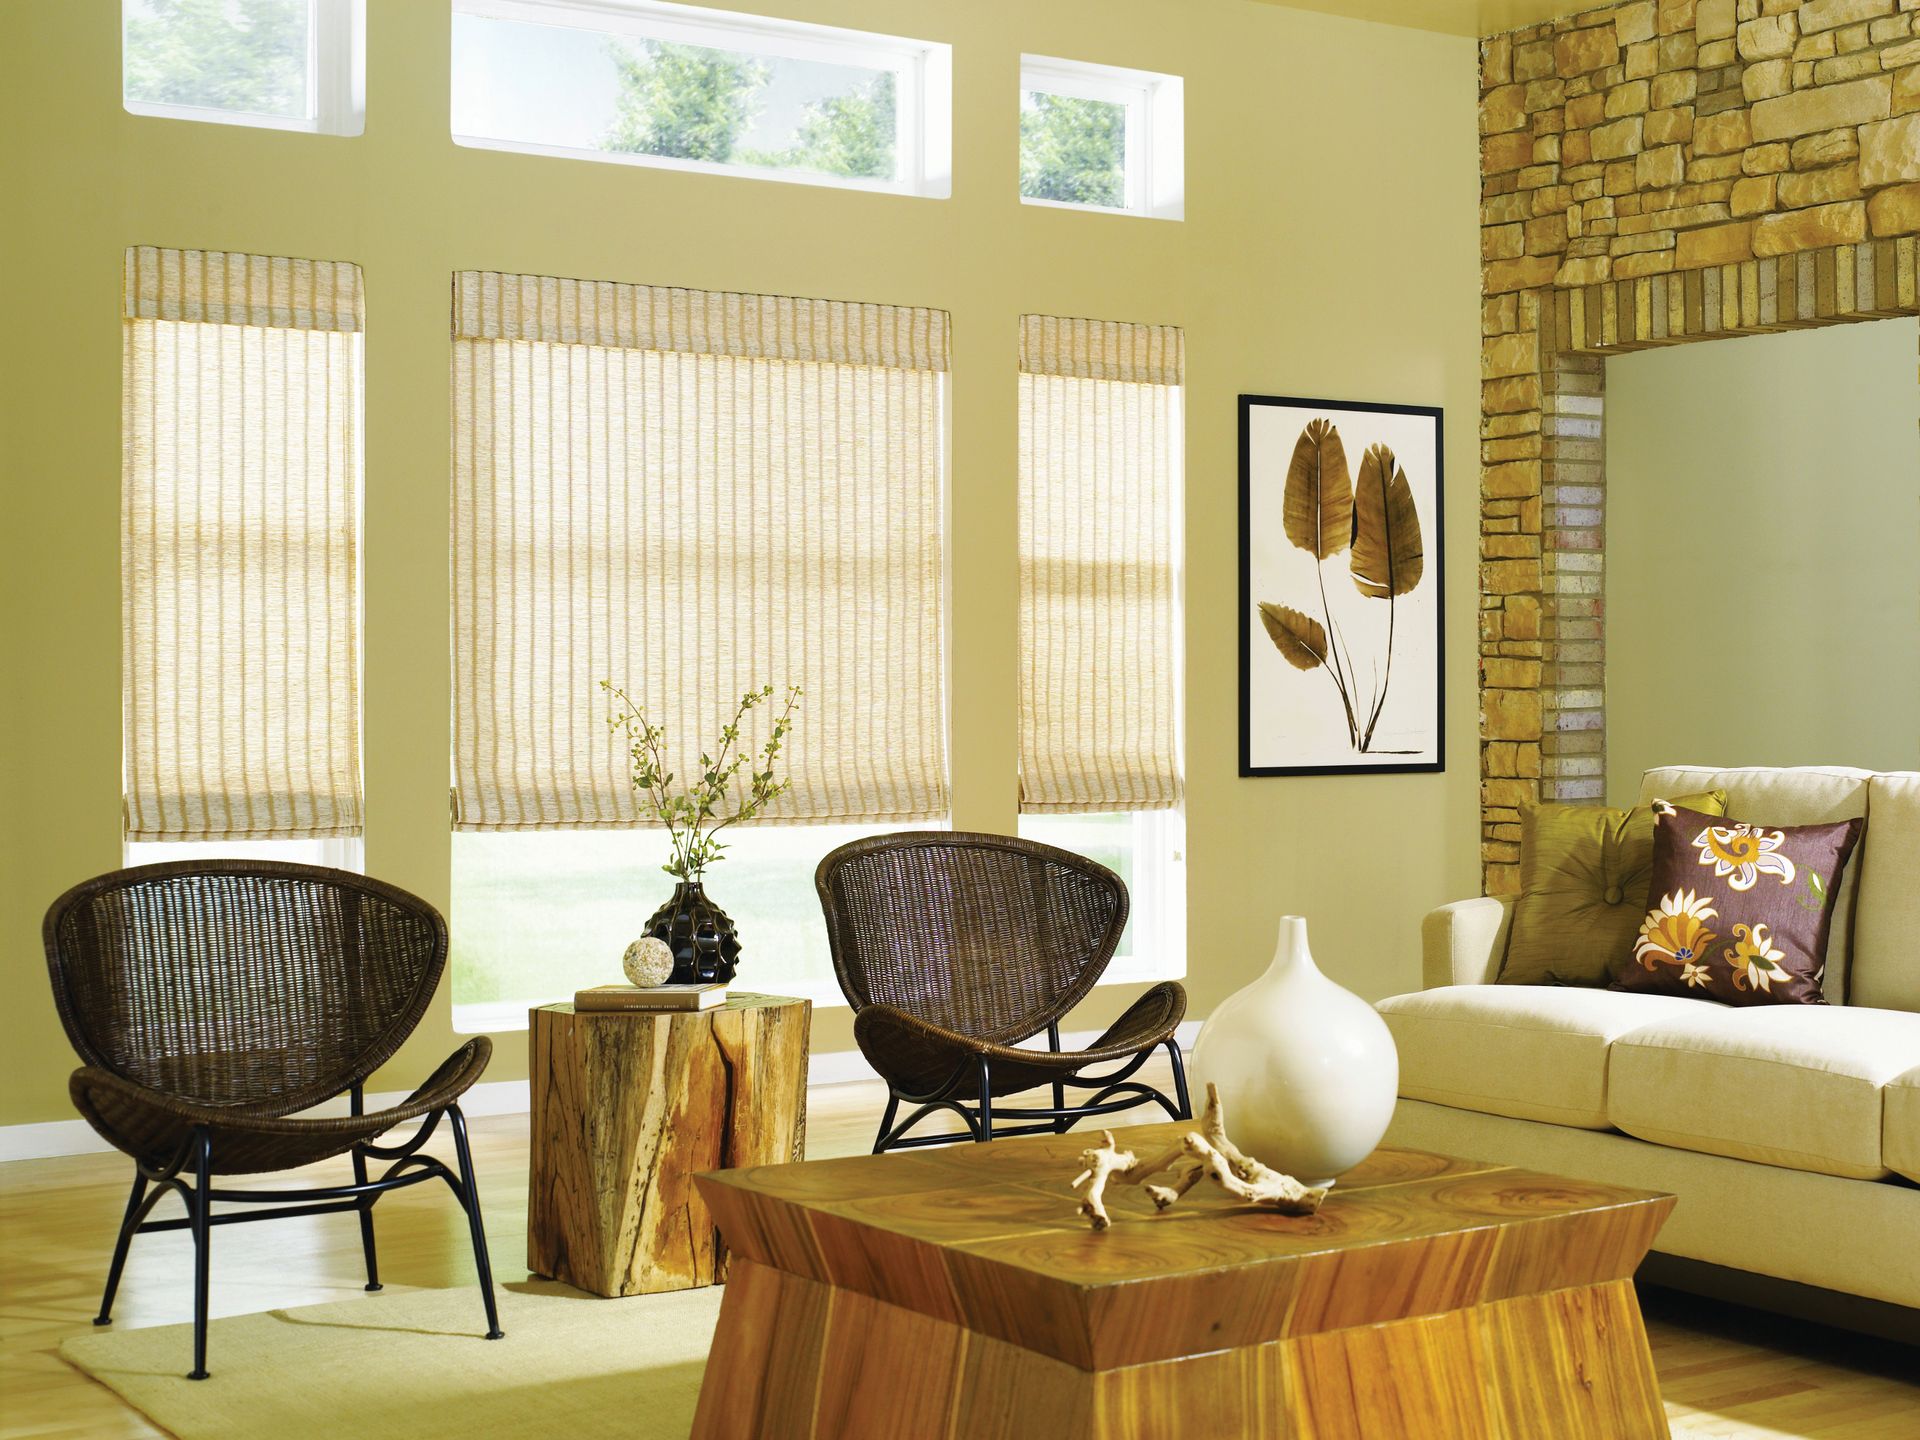 Light Filtering Or Blackout Shades For Living Room